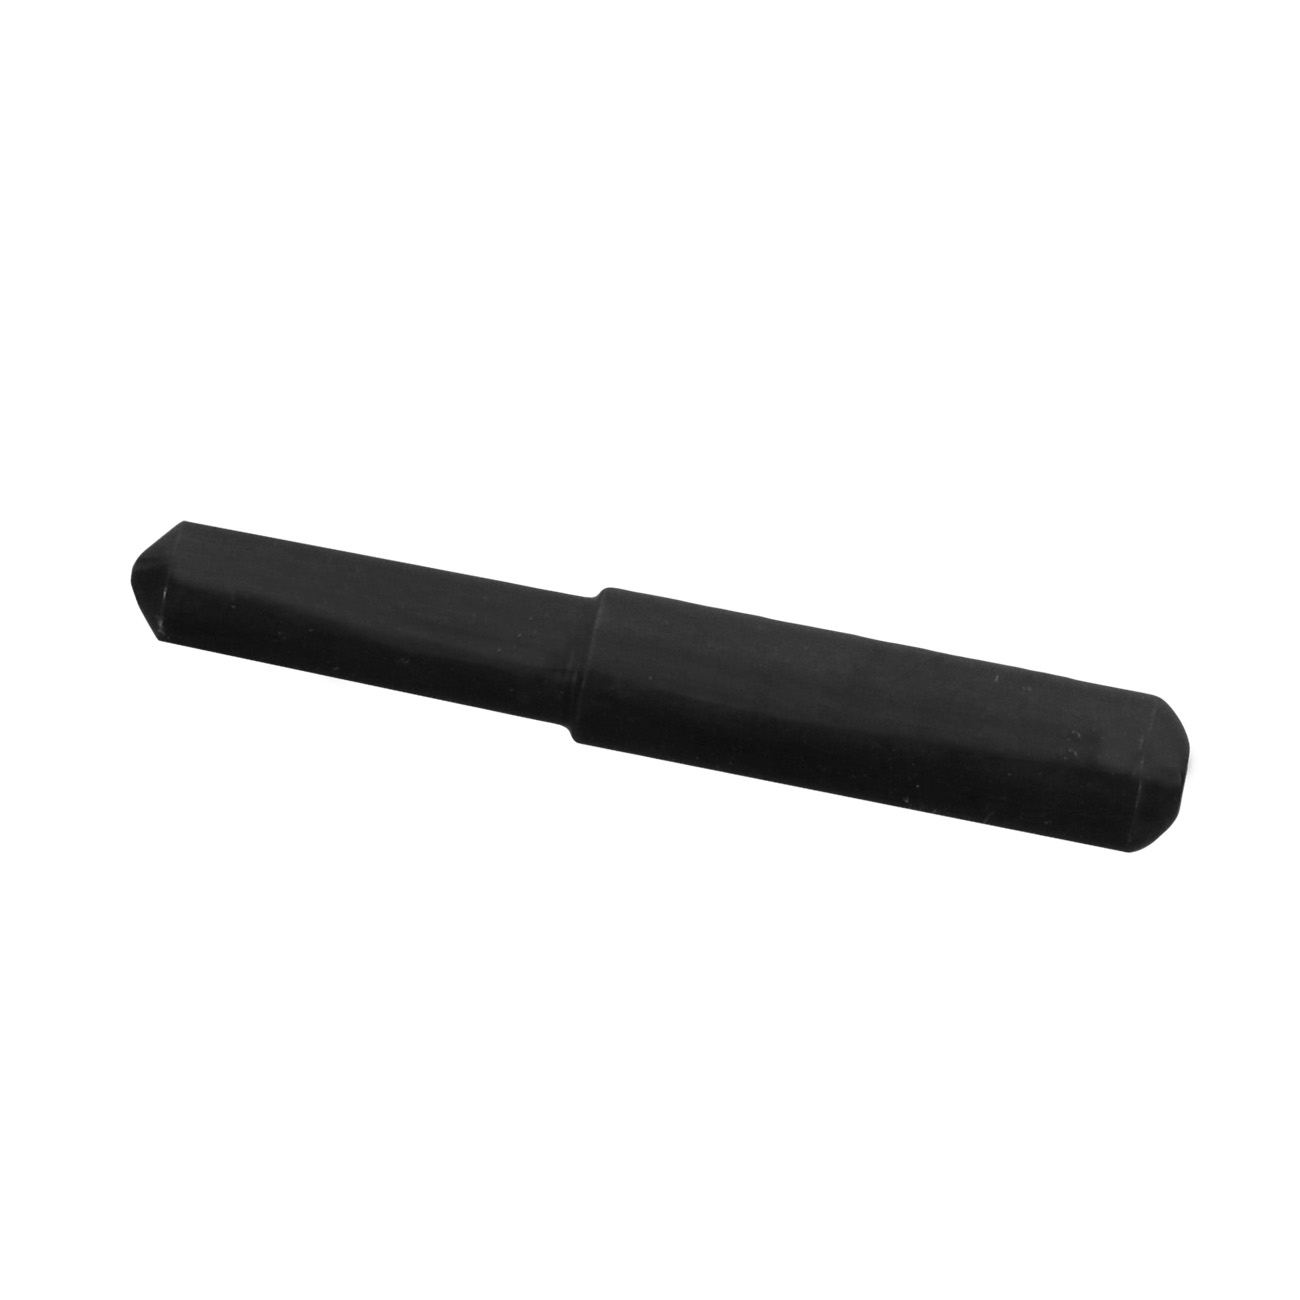 Image of Birzman Replacement Pin for Dragonfly Chain Tool - black